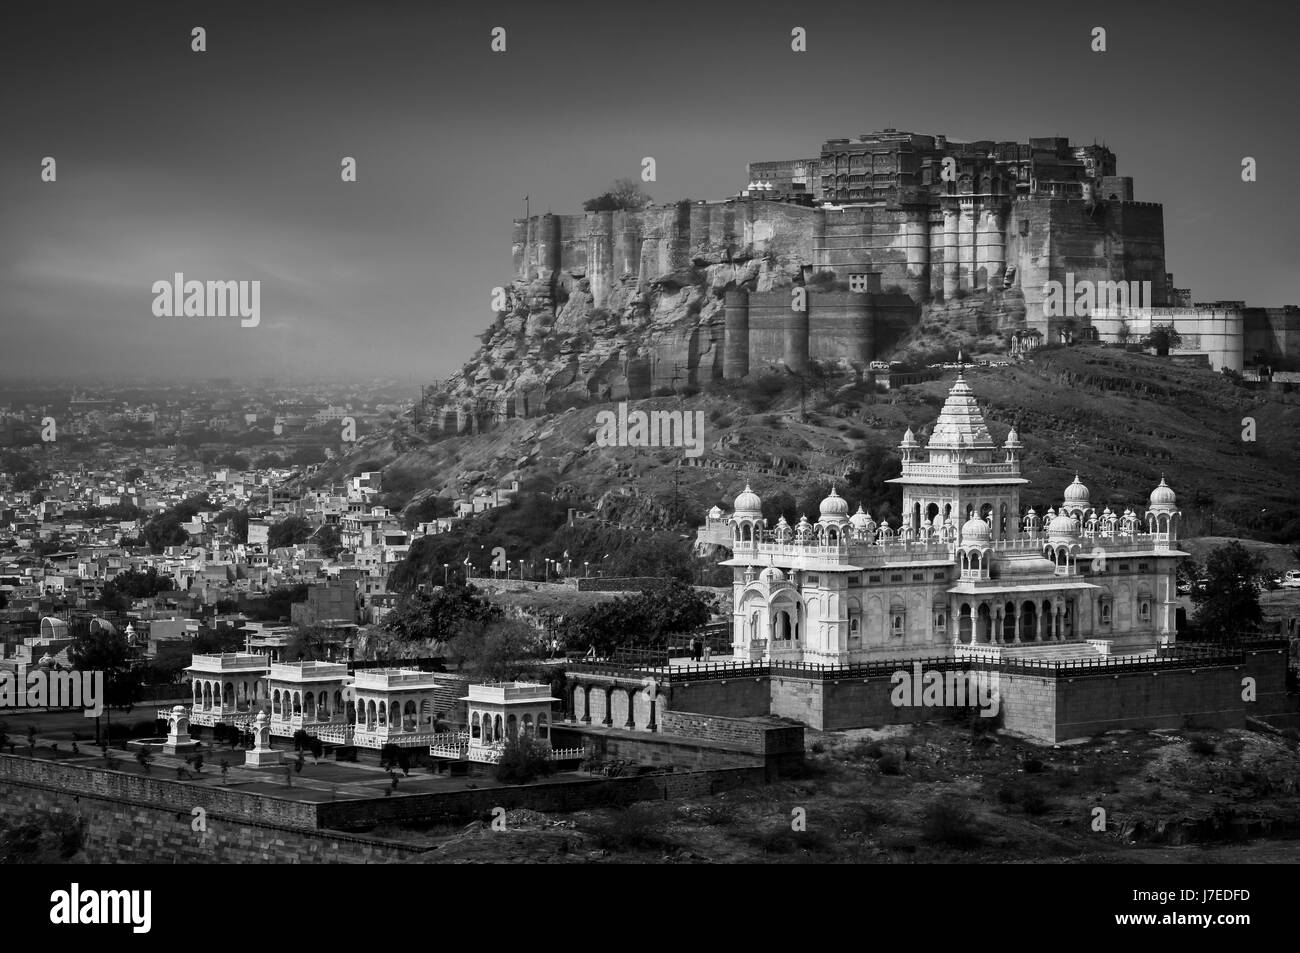 Dramatic black and white photo of Mehrangarh Fort overlooking the Rajasthani City of Jodhpur in India. One of the largest Forts in India. Stock Photo